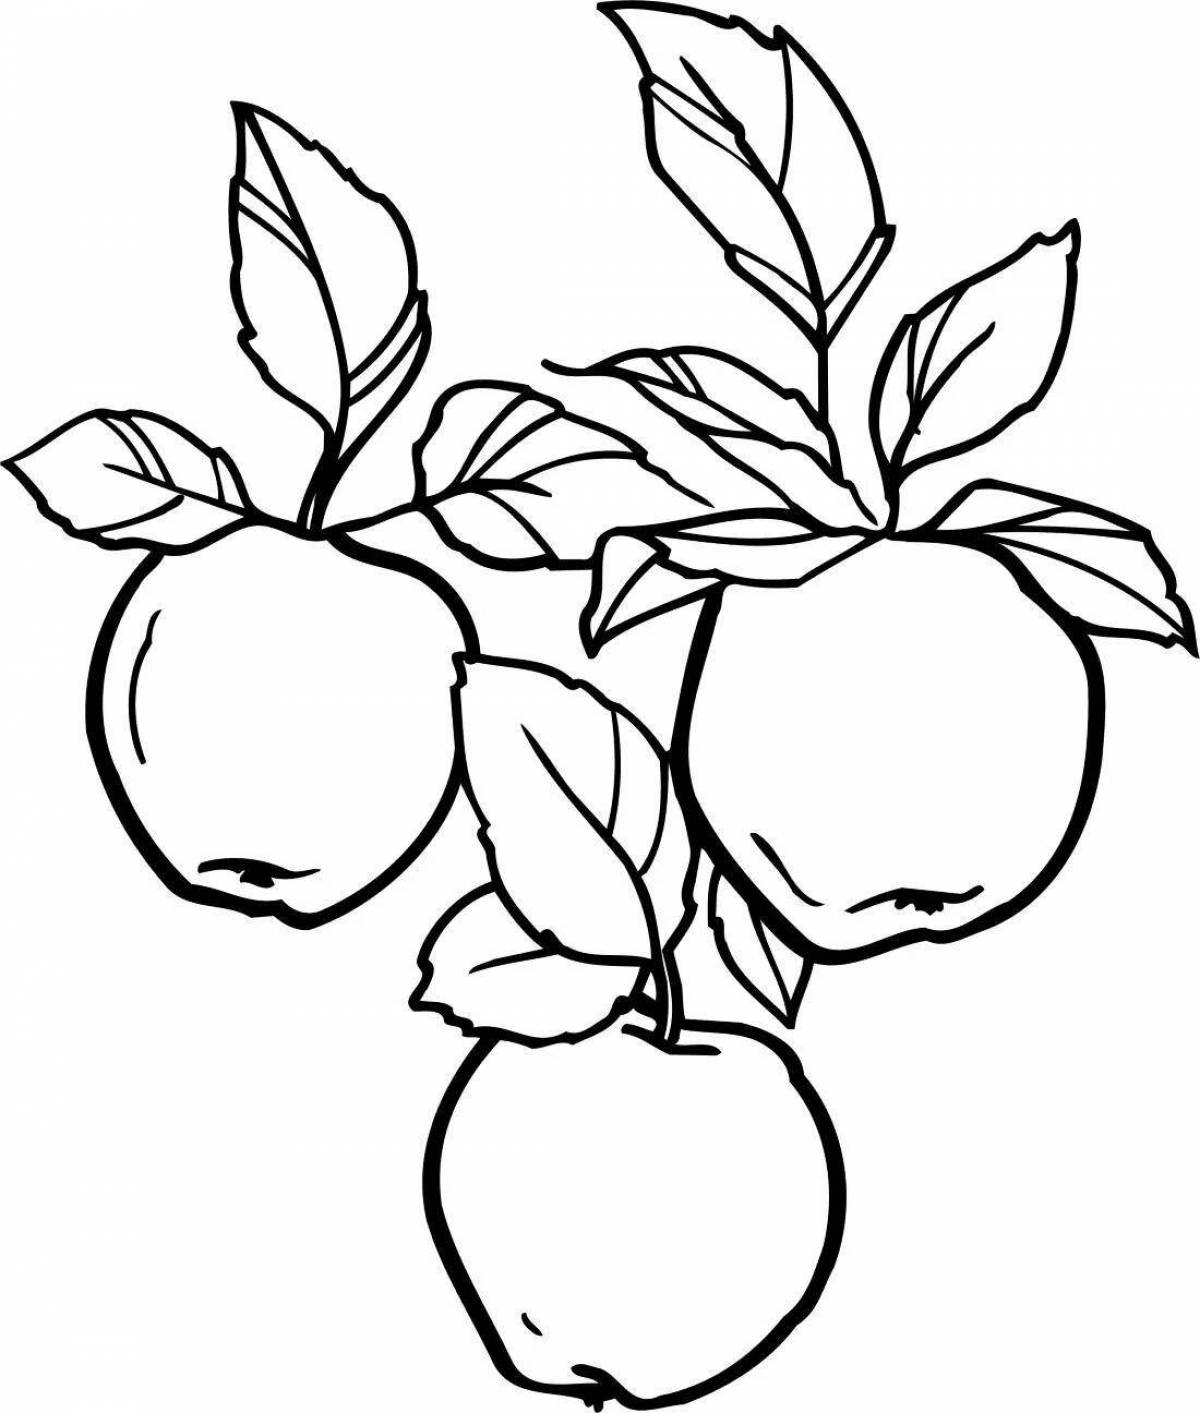 Apple drawing for kids #5